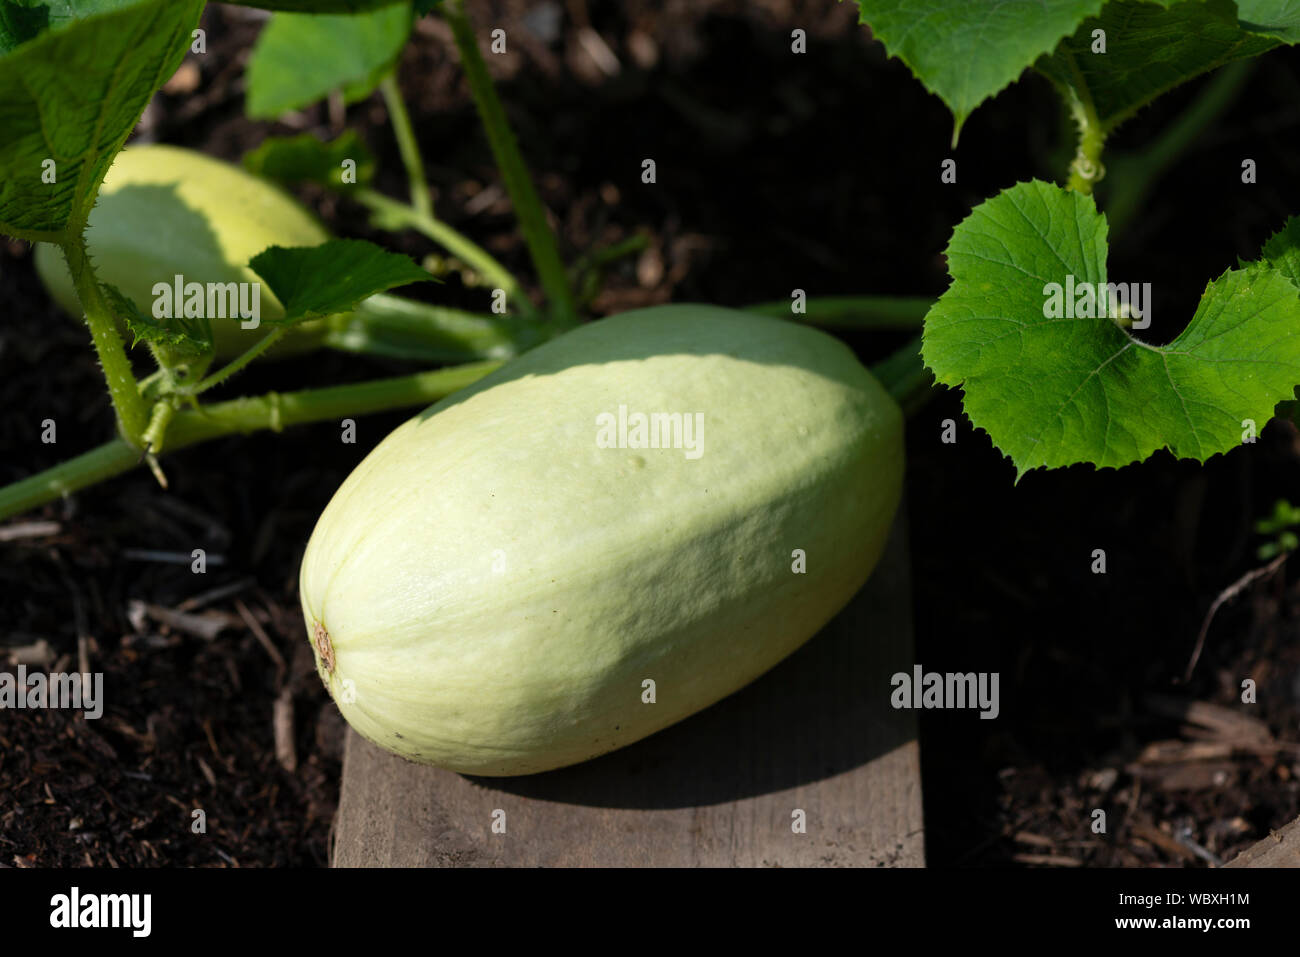 Large Spaghetti squash (Cucurbita pepo), raised onto a wooden board to prevent the fruit touching the soil rotting. South Yorkshire, UK. Stock Photo